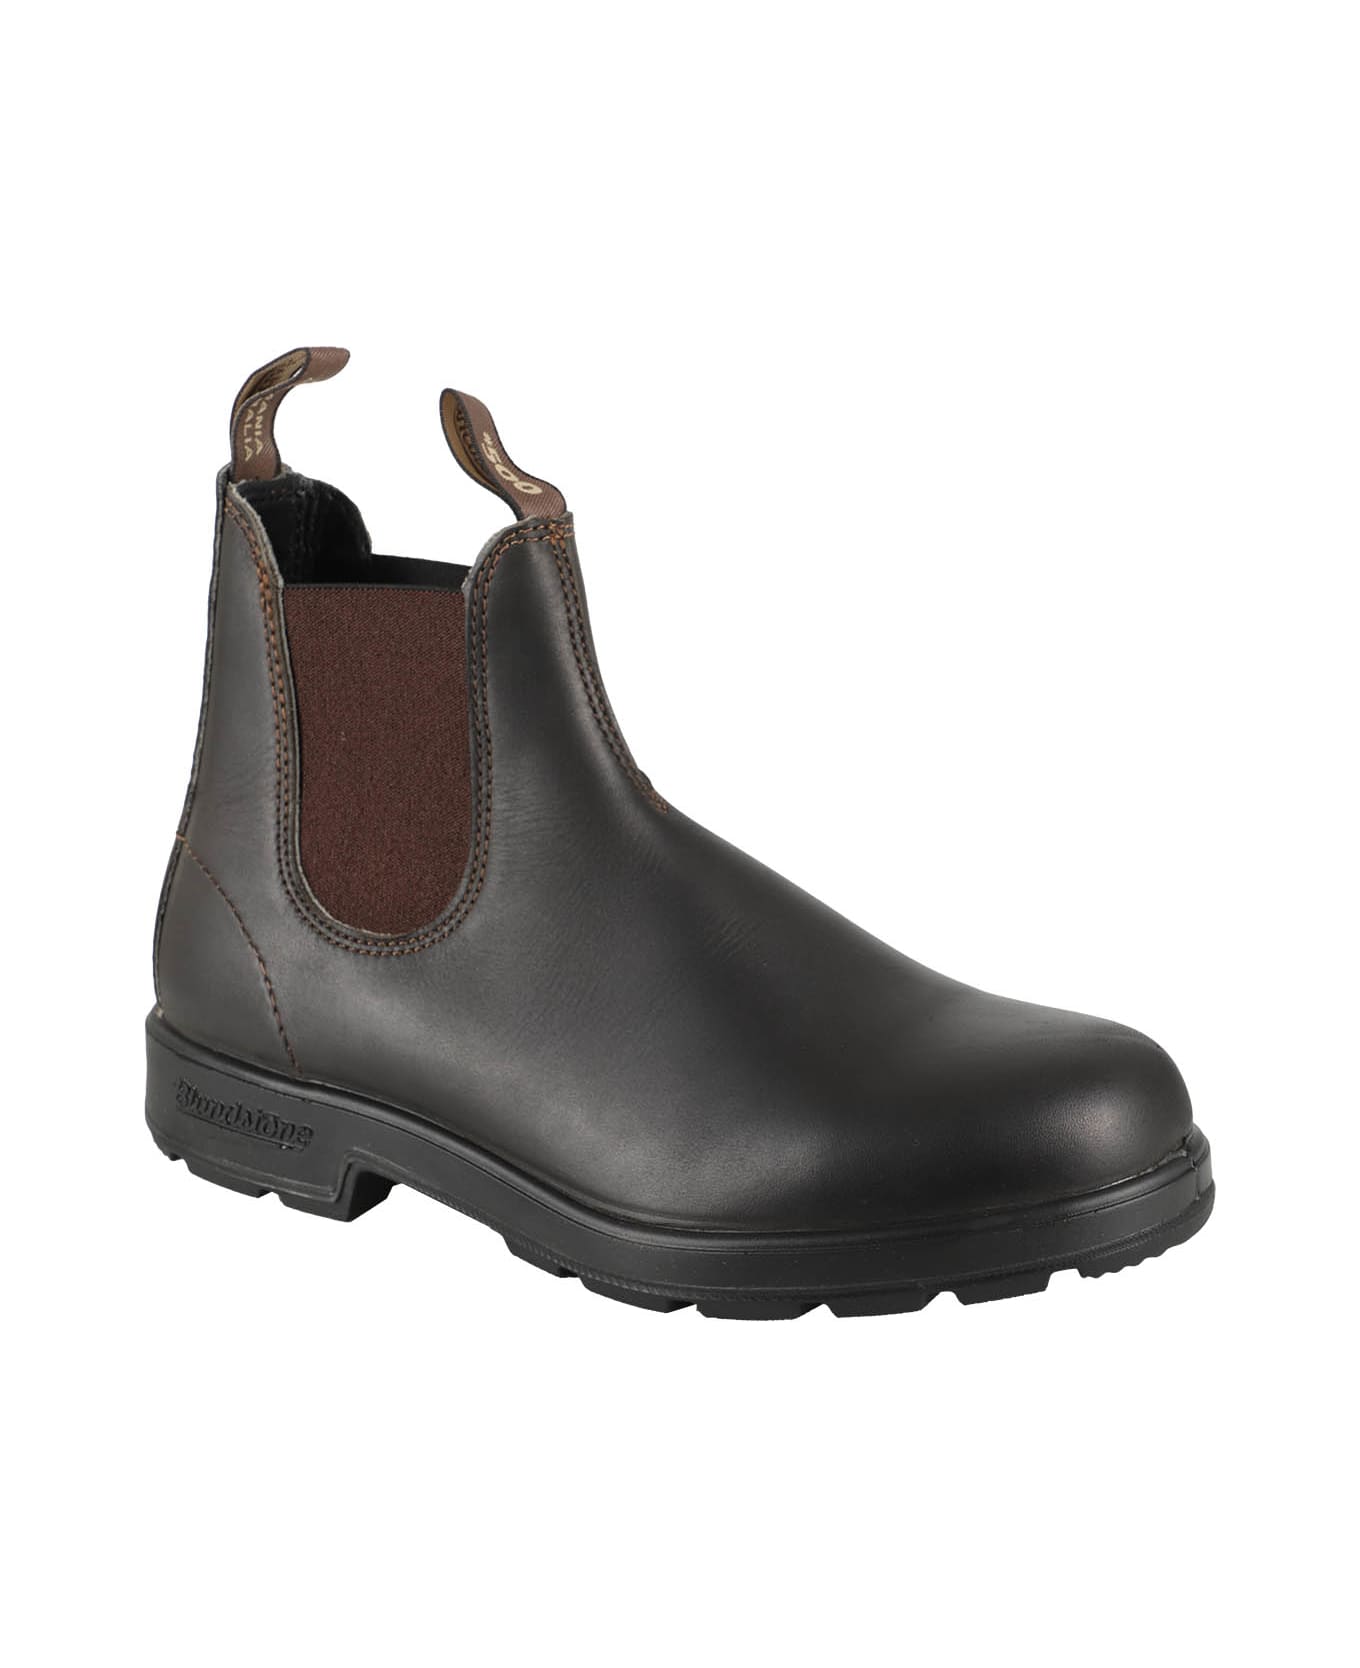 Blundstone Leather - Stout Brown Brown